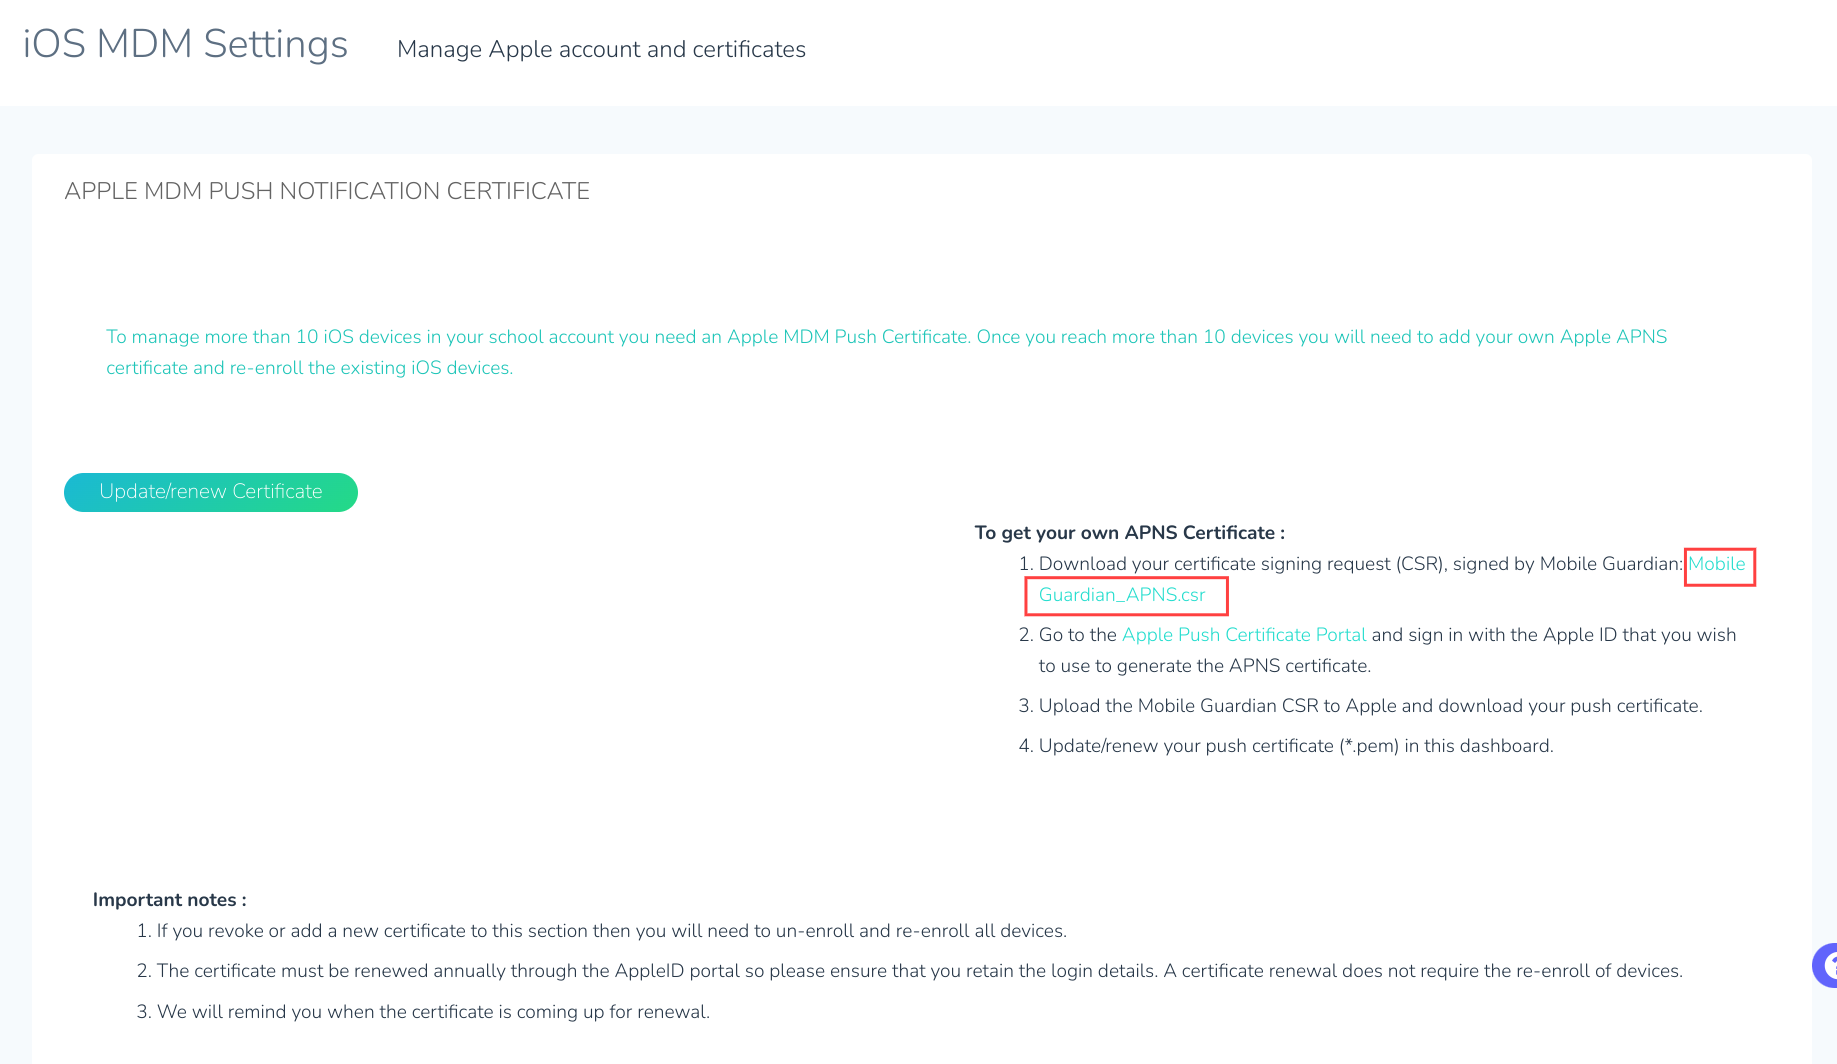 Creating and uploading your Apple Push Notification certificate 2.png